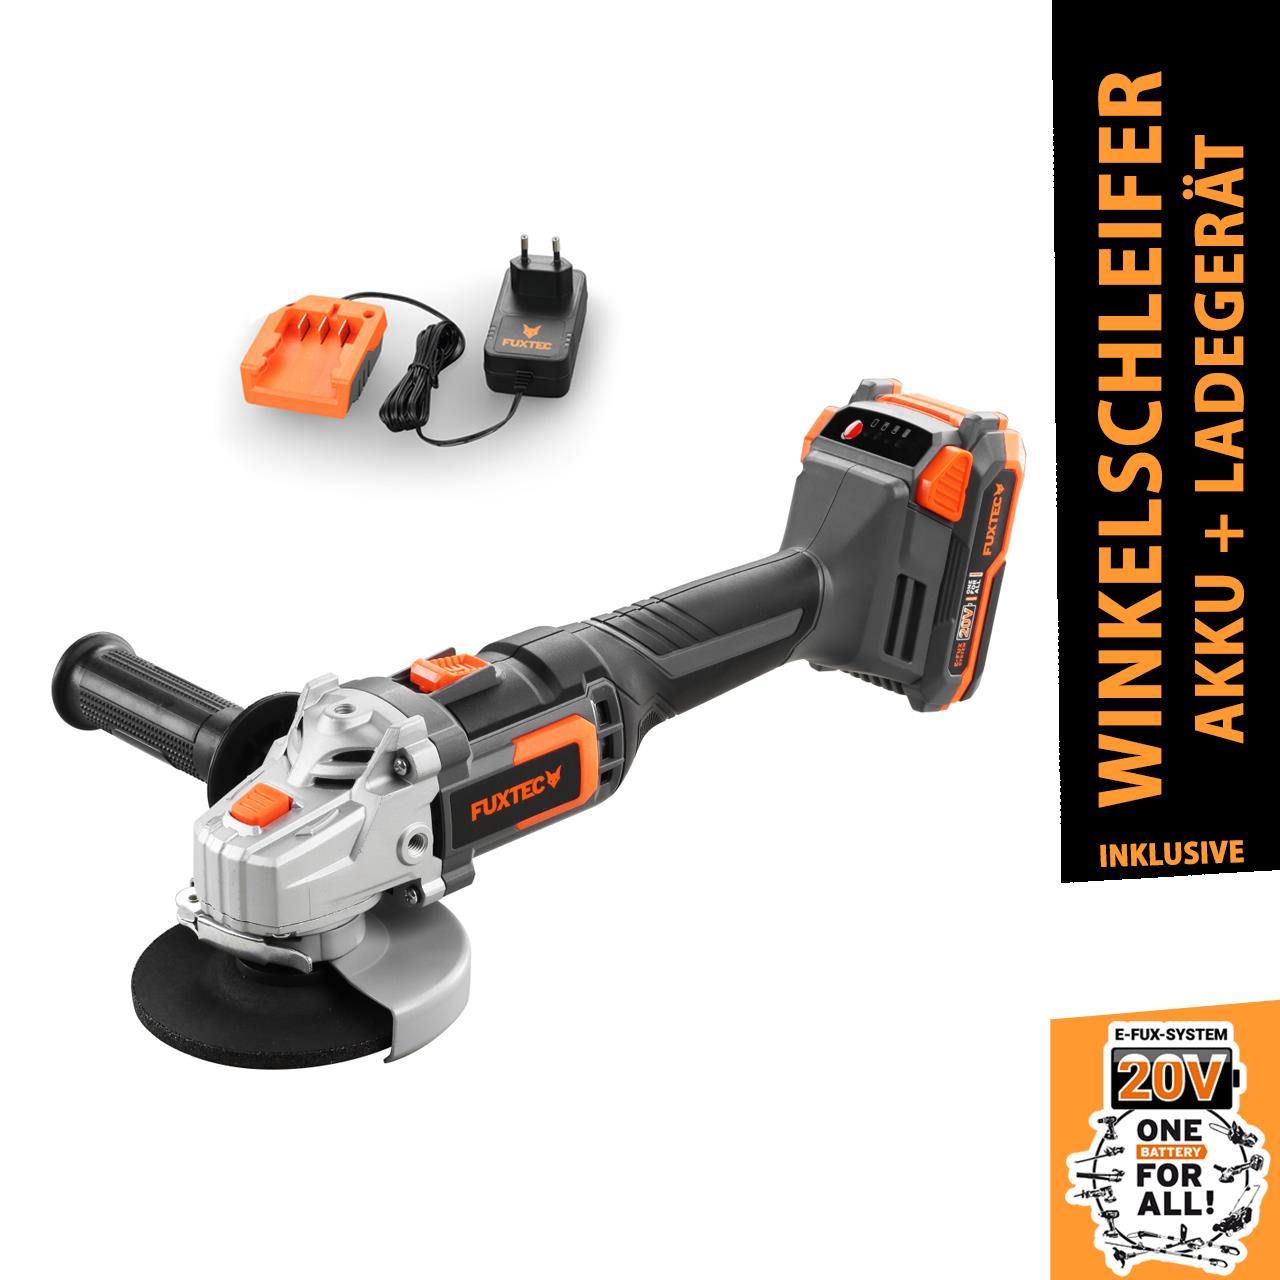 20V cordless angle grinder - Kit FUXTEC FX-E1WS20 incl. battery (2Ah) and charger (1A)